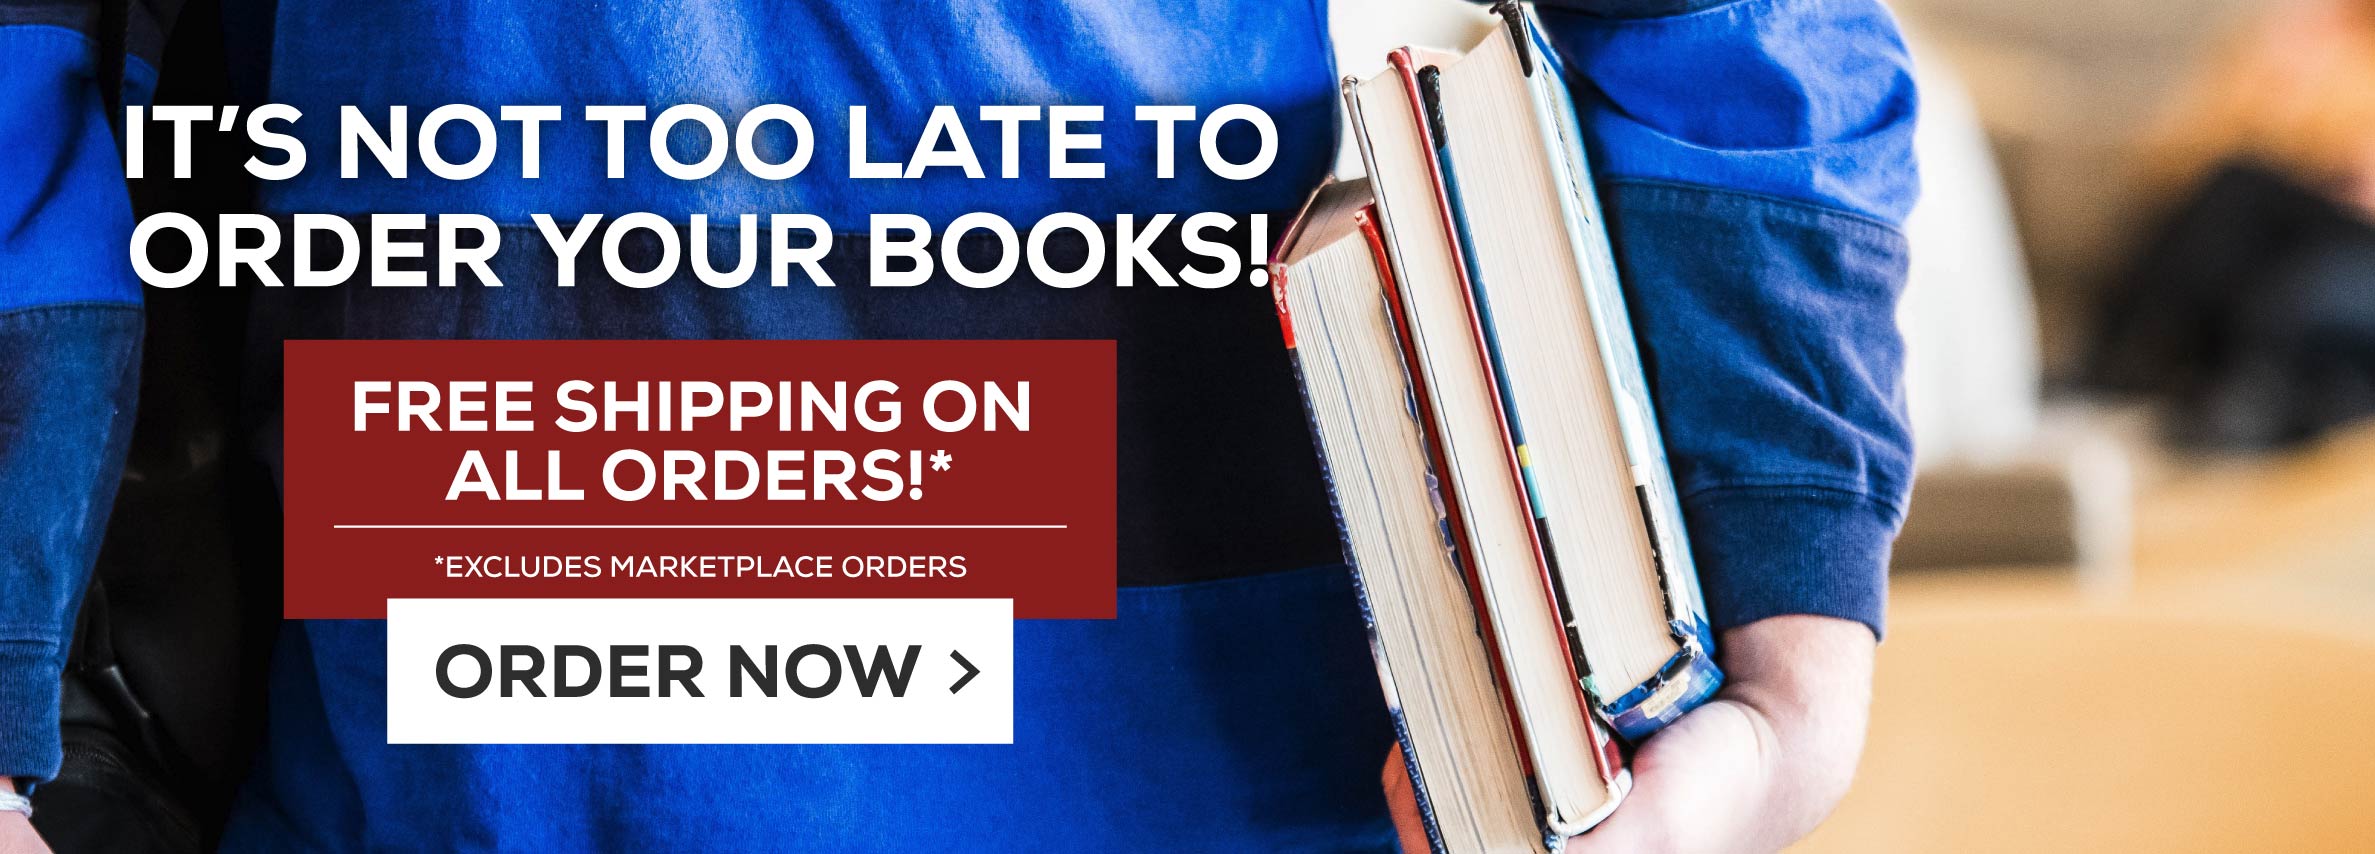 It's Not Too Late to Order Your Books! - Free Shipping on All Orders! - Excludes Marketplace Orders - Order Now (new tab)